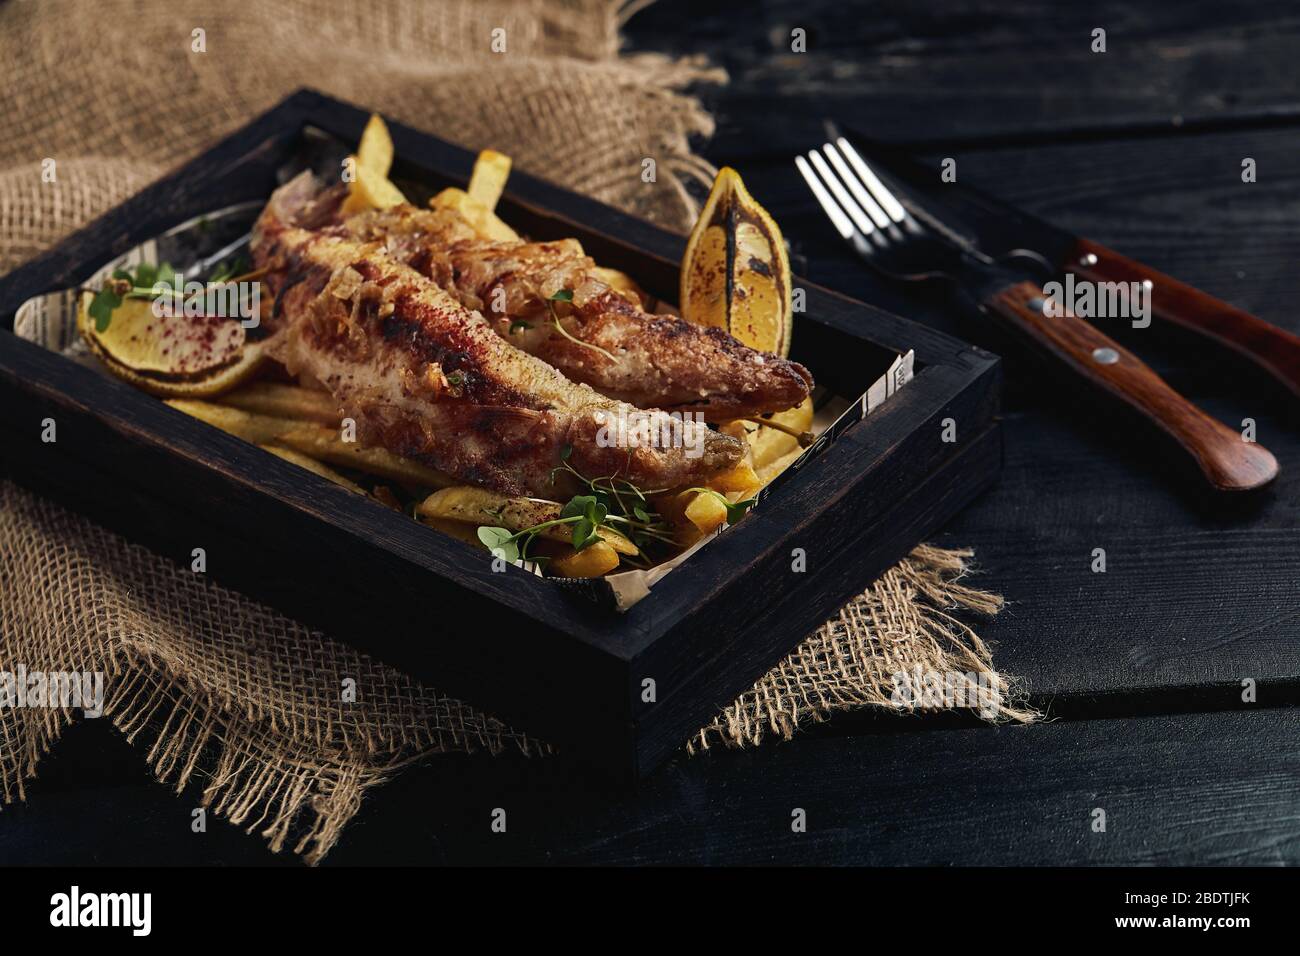 Fish and chips concept, traditional english food, fried fish and fries. Dark background, rustics style, wooden background, copy space. Stock Photo